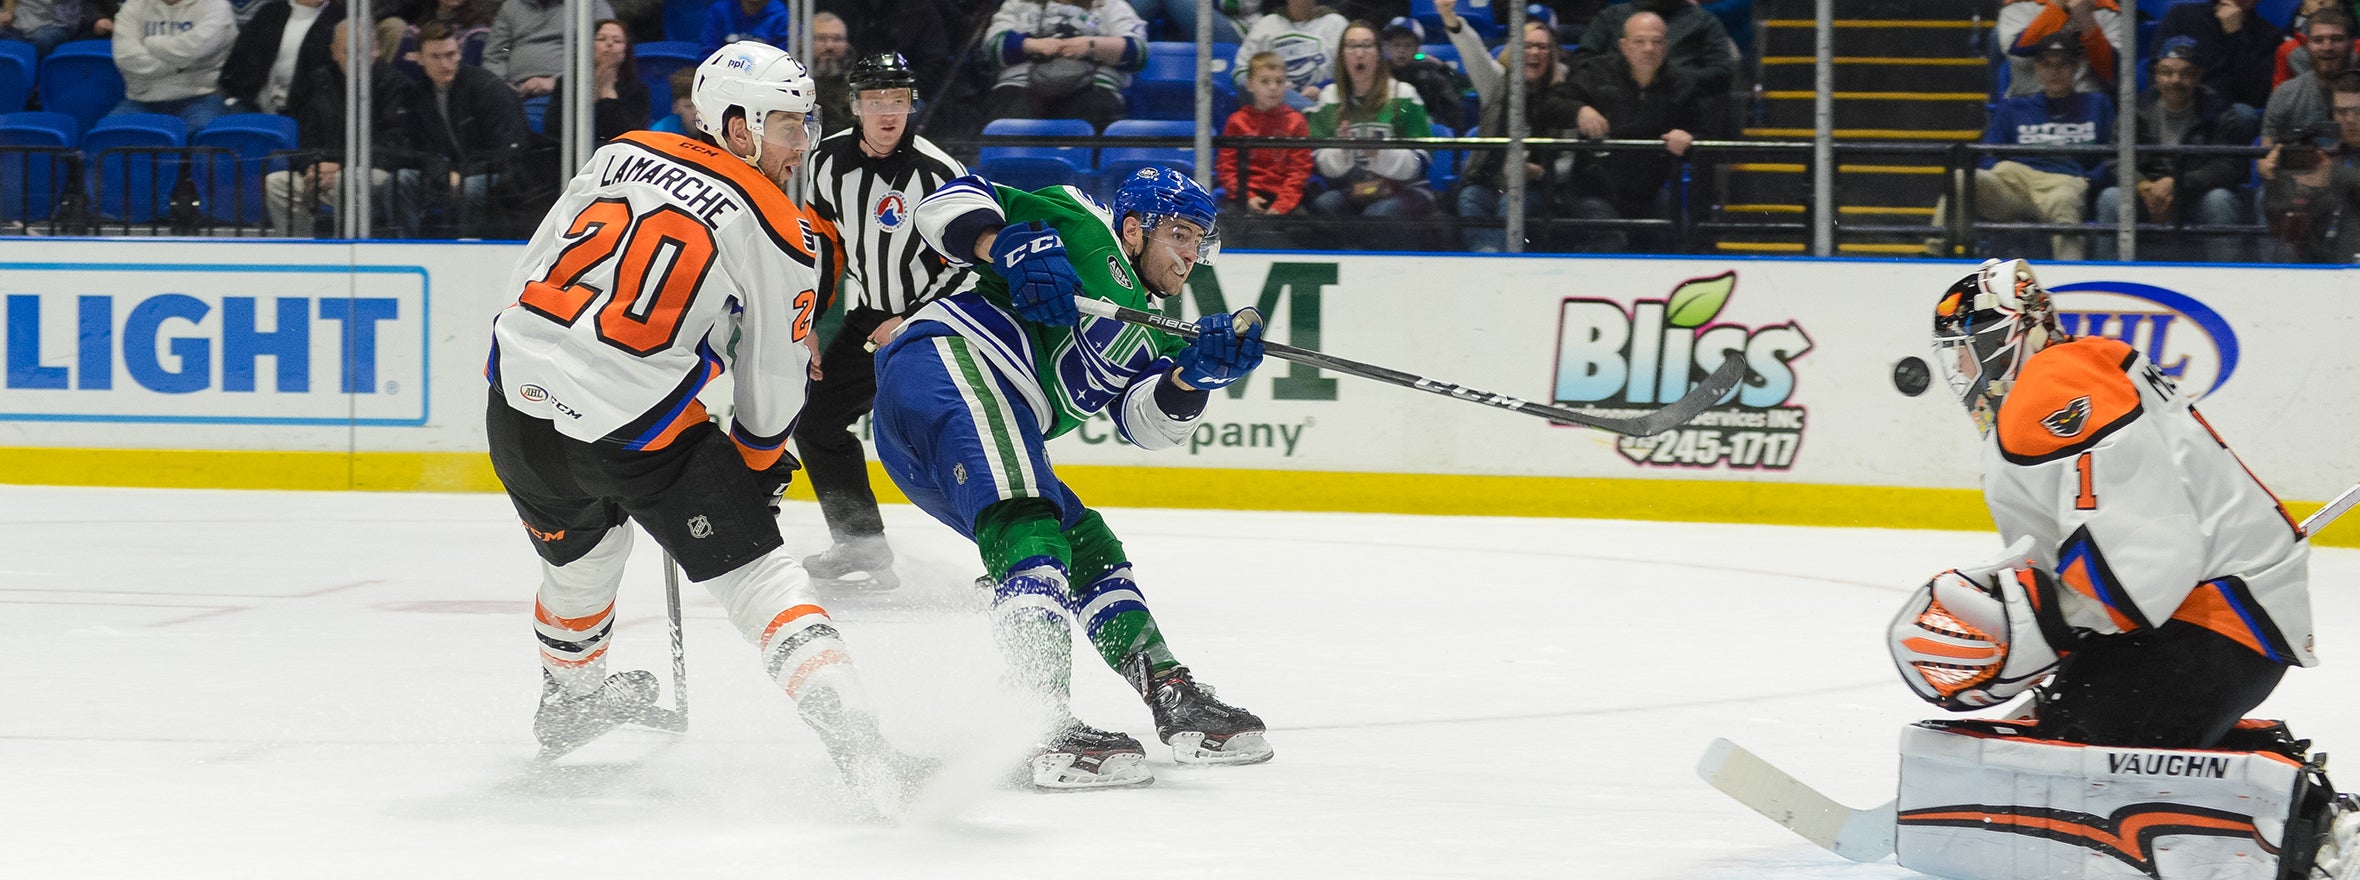 COMETS POINT STREAK SNAPPED BY PHANTOMS